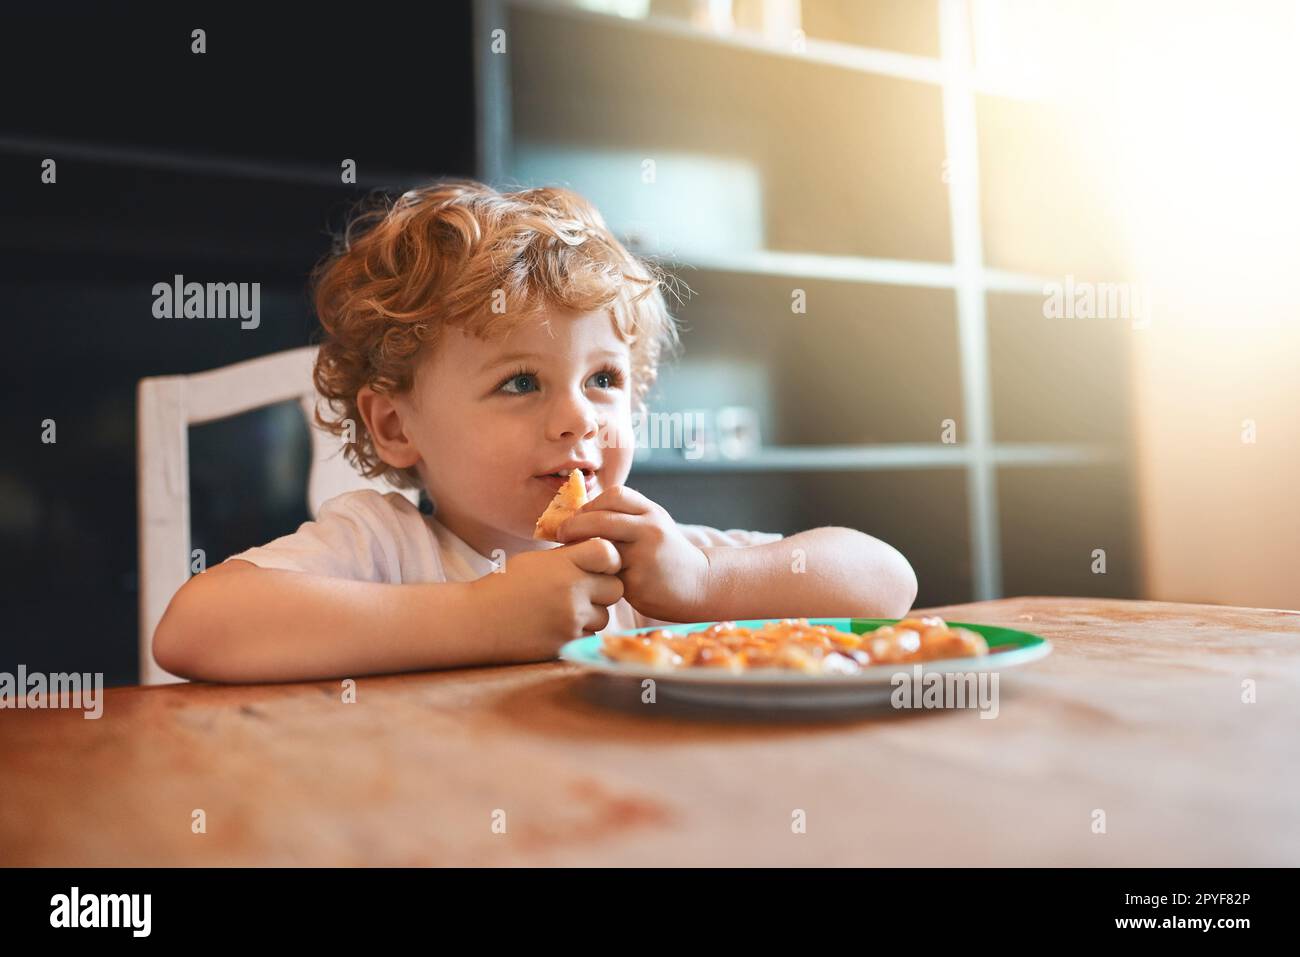 I love Moms cooking. an adorable little boy eating at home. Stock Photo